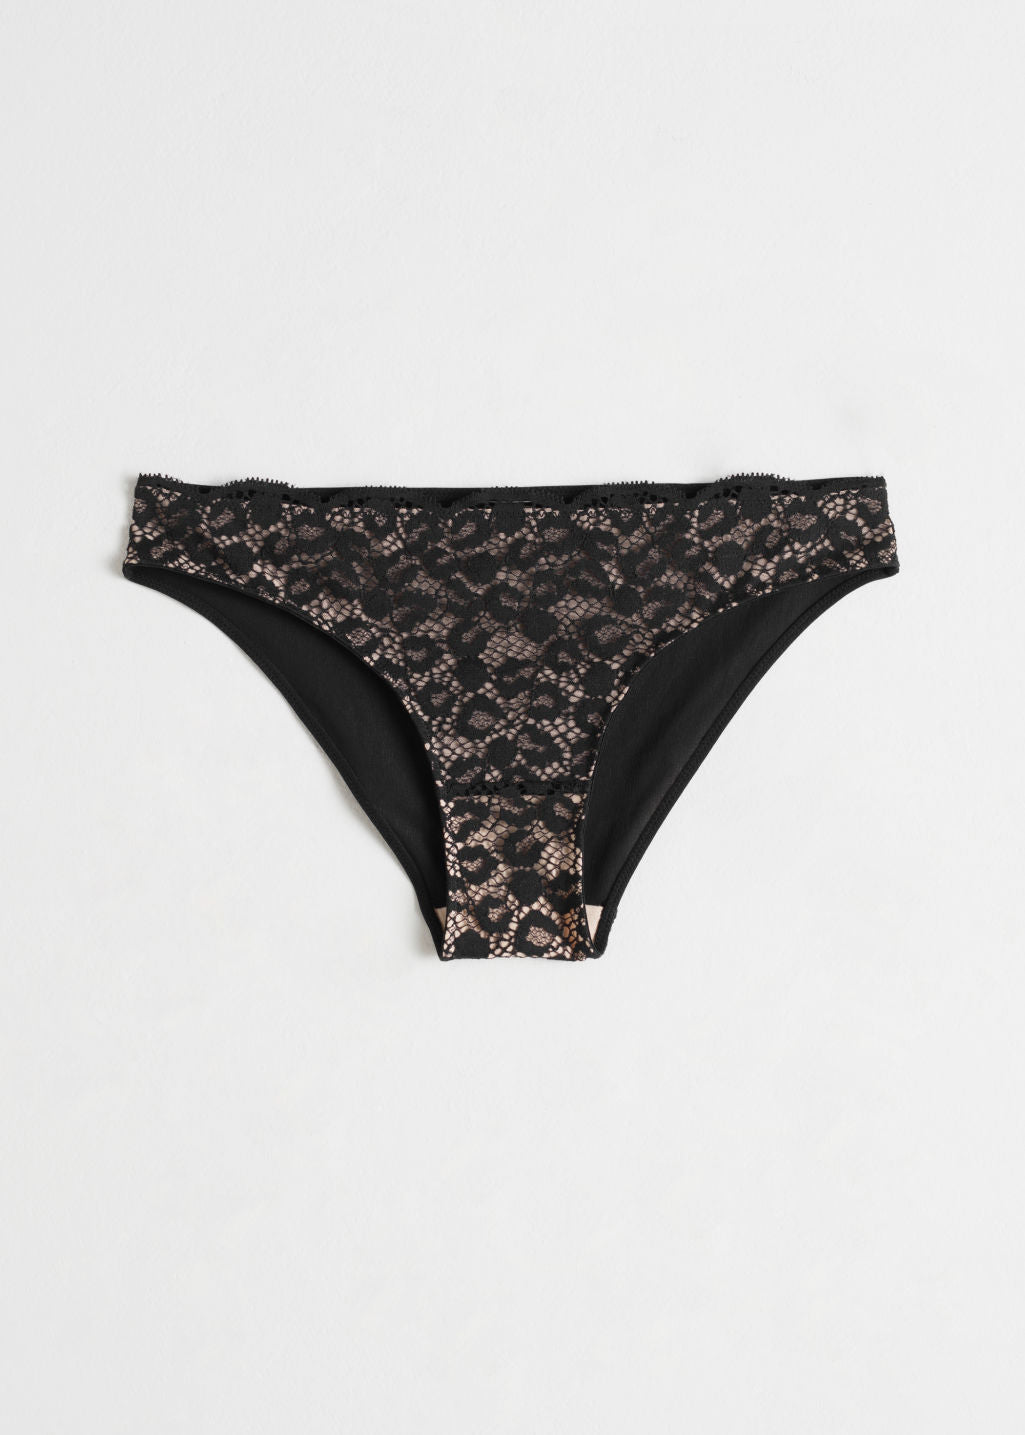 Lace Hipster Brief